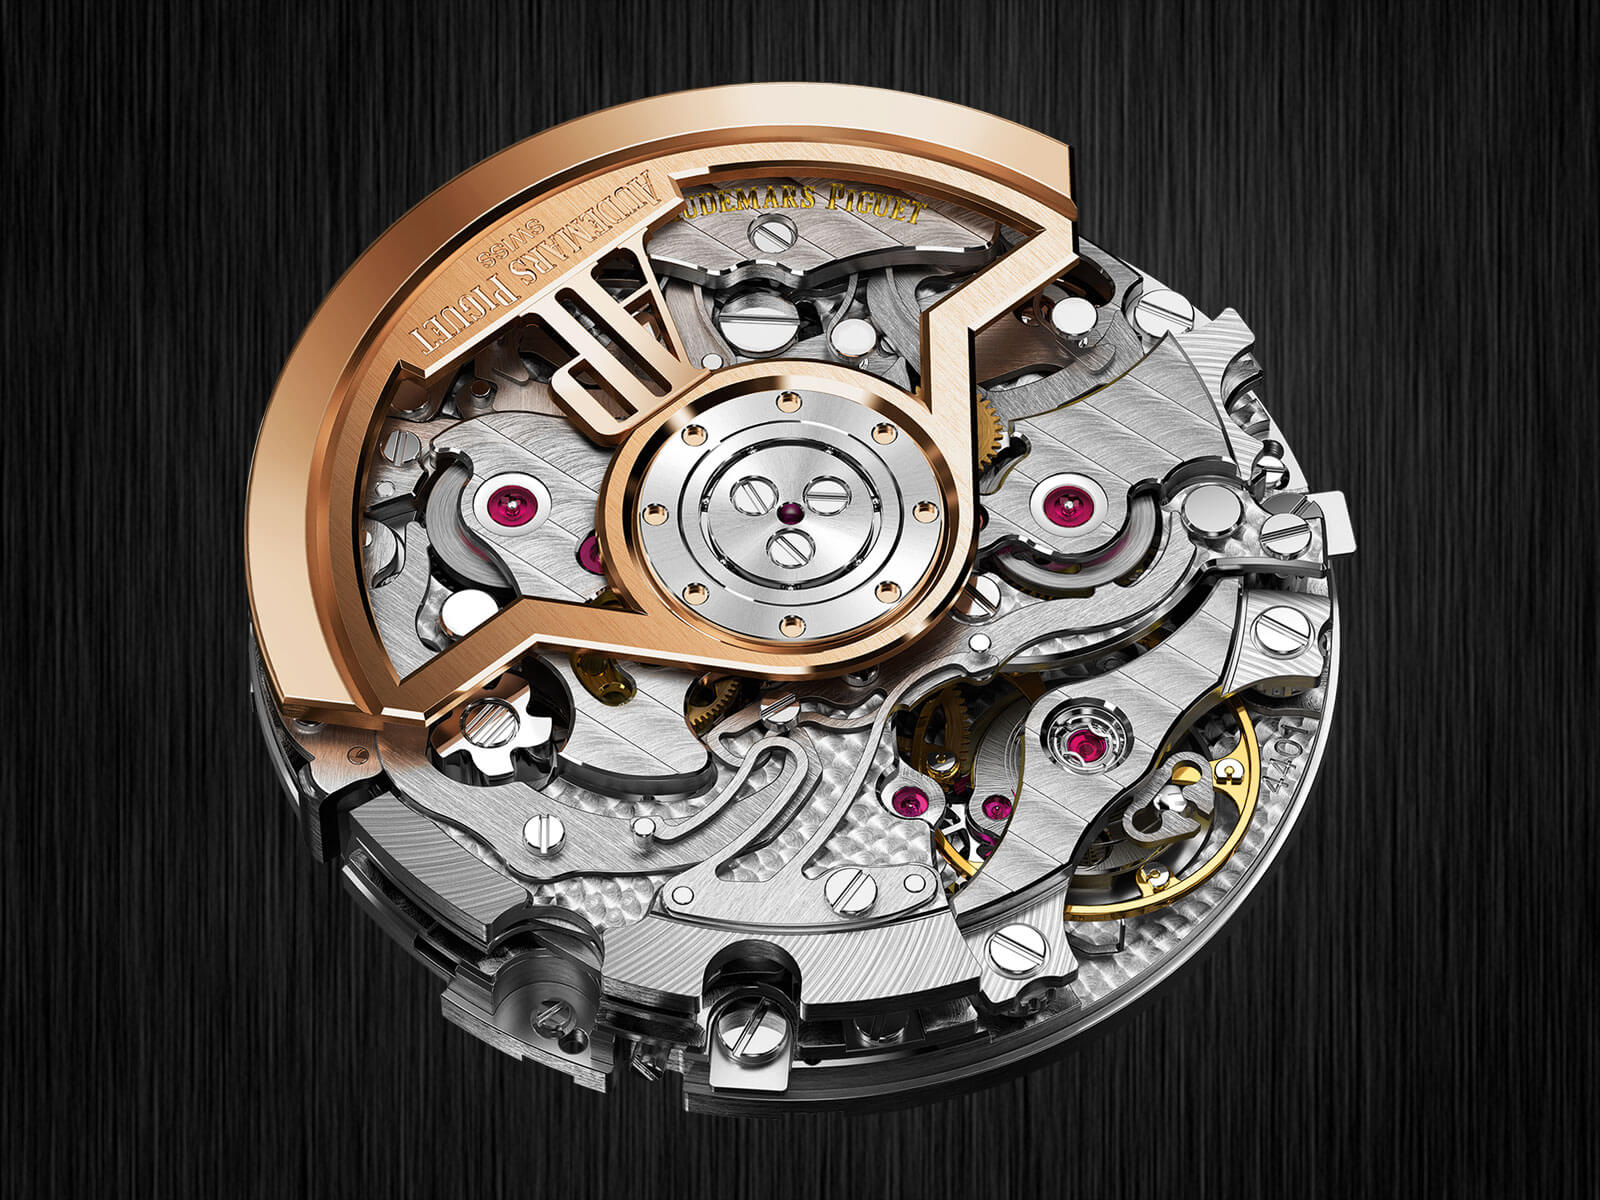 Audemars Piguet Calibre 4401 Automatic Movement with Flyback Function